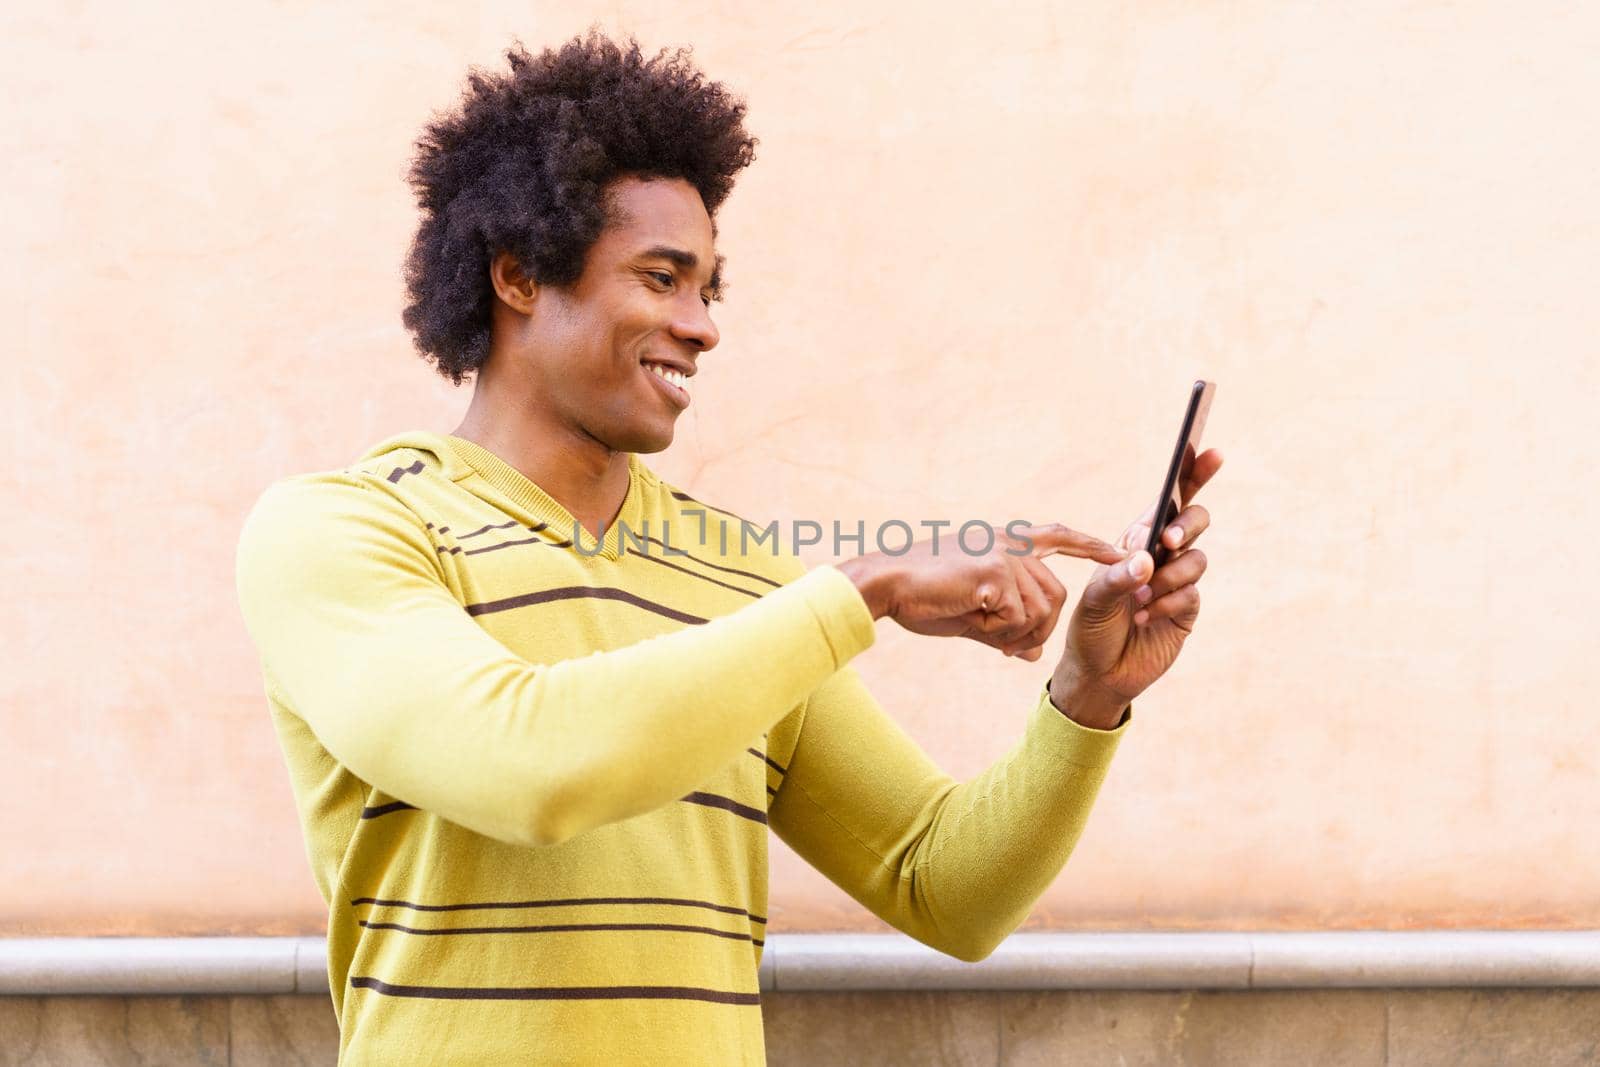 Black man with afro hair and headphones using smartphone. by javiindy